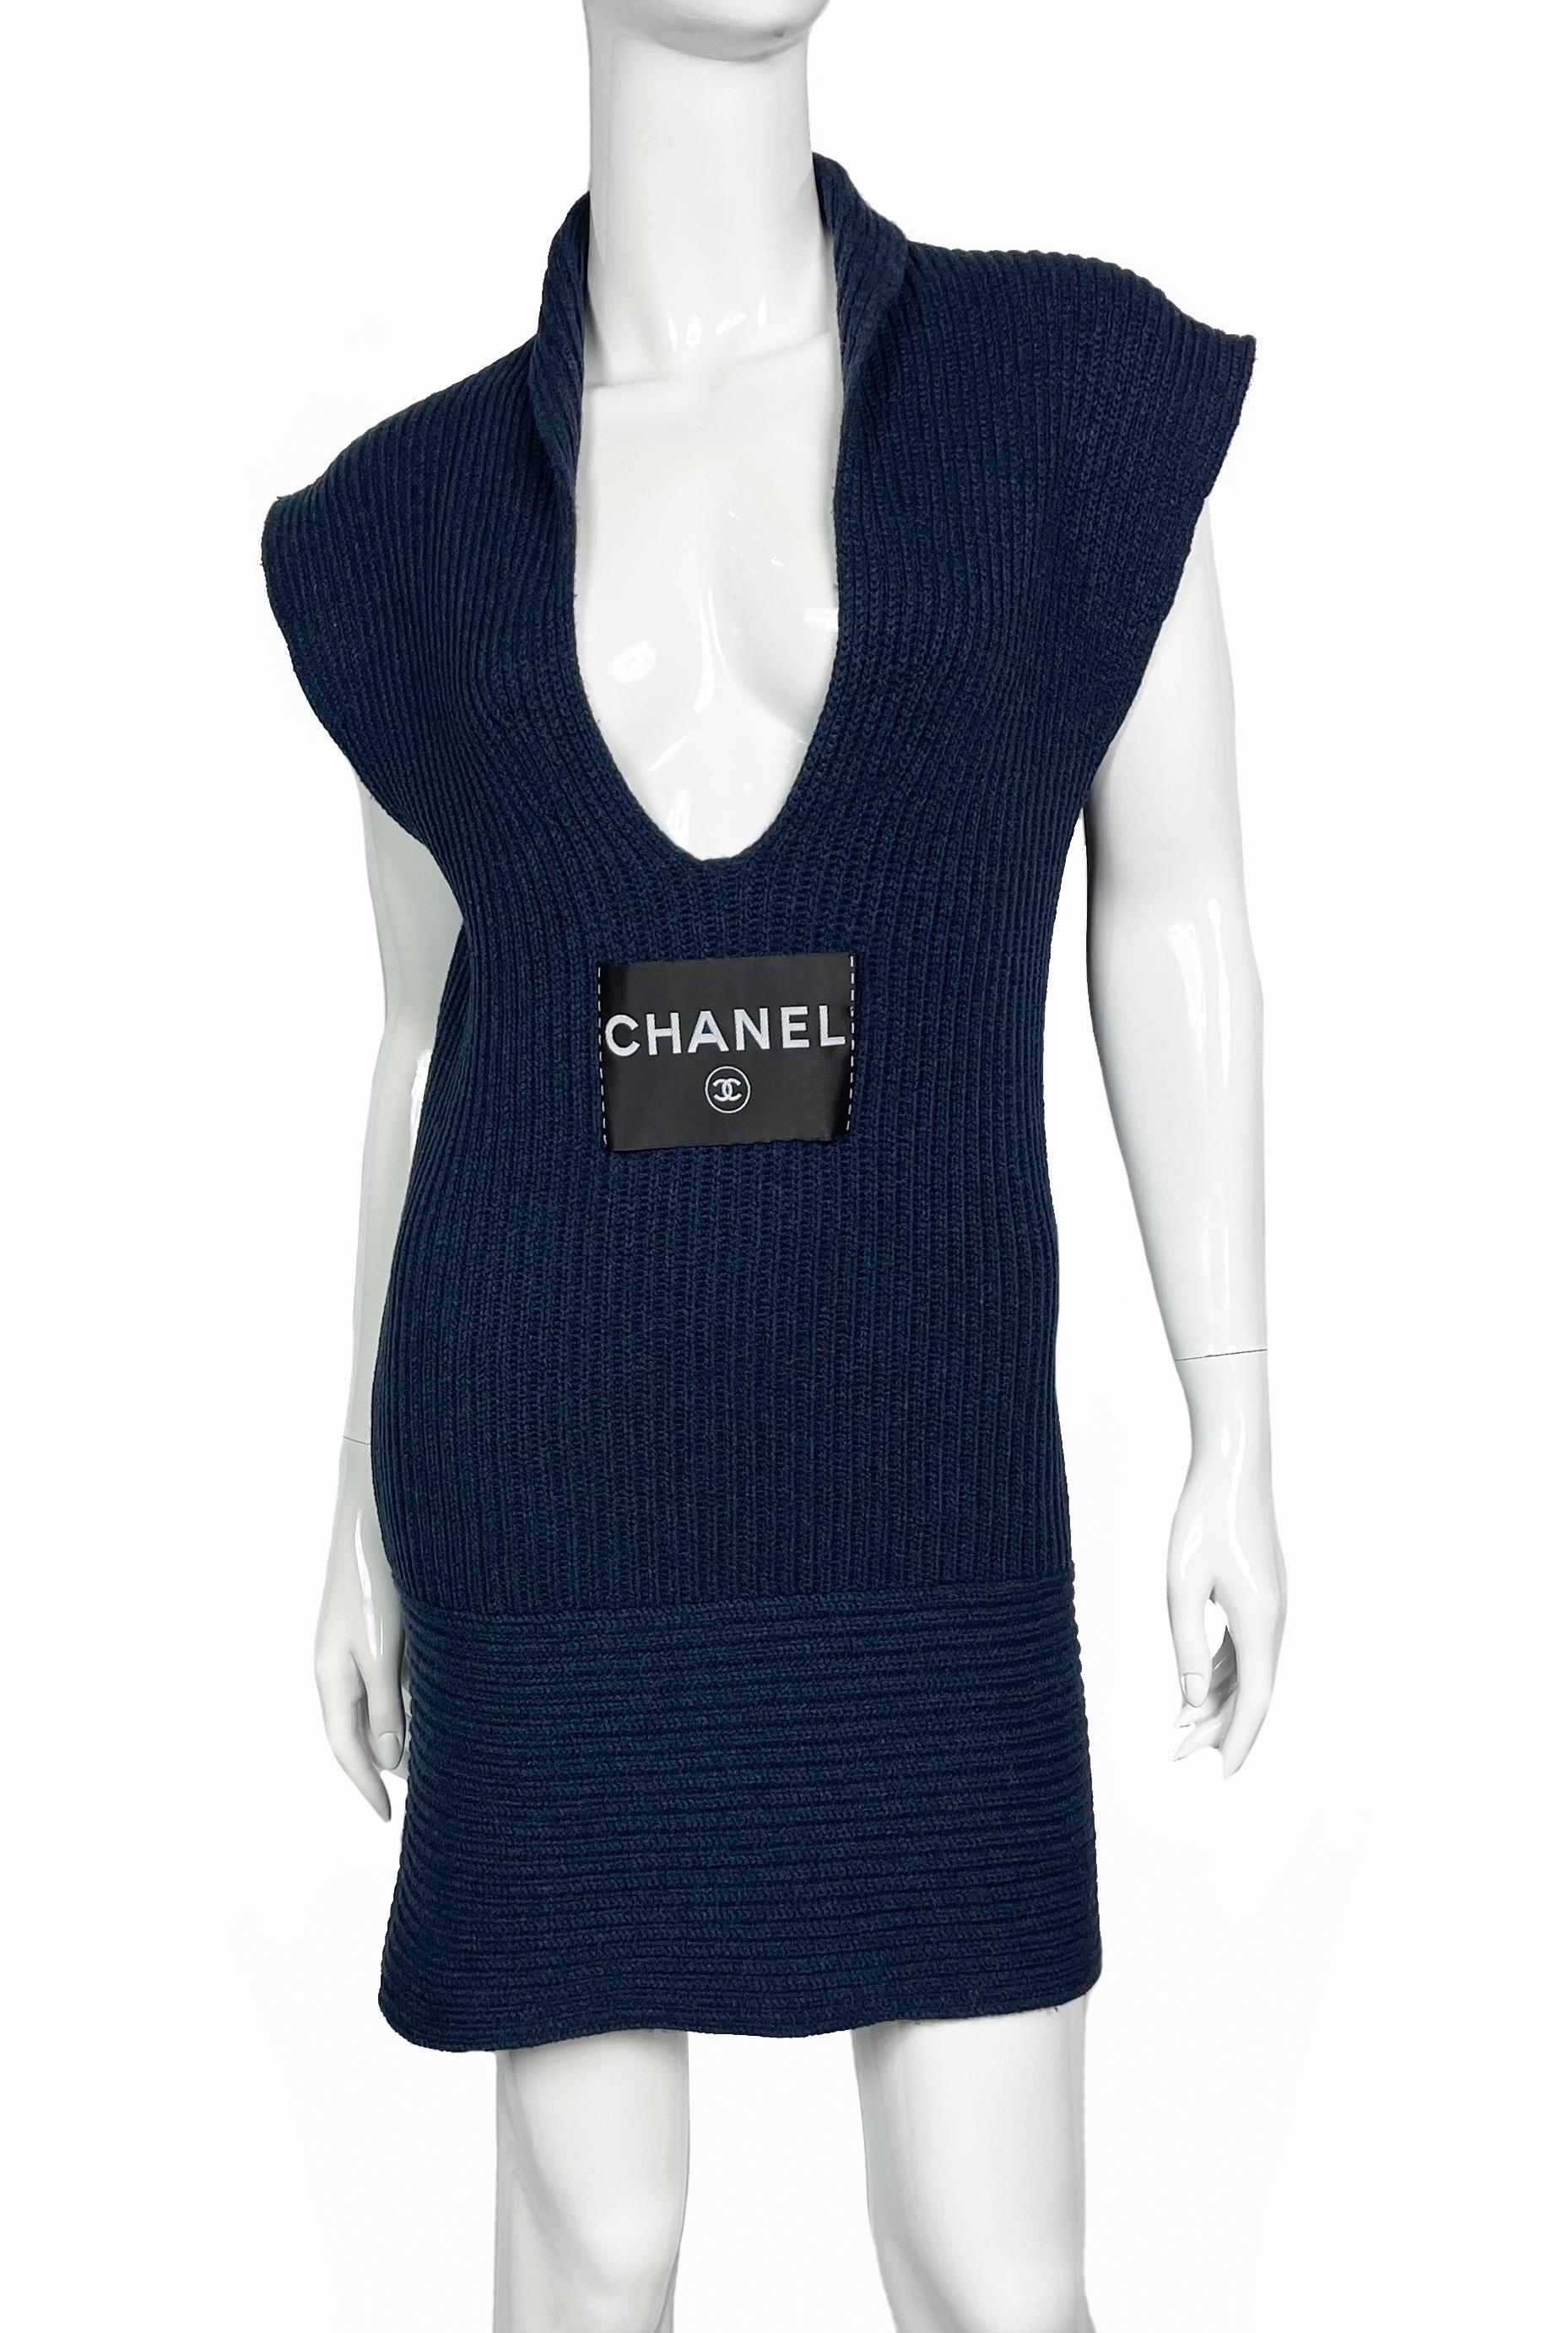 Chanel cashmere dark blue dress from 2008 resort Collection by Karl Lagerfeld. 
Sleeveless dress with plunging V-neckline. 
Chanel and CC Logo tag on the front. 
Size - FR36/S
Composition:100% cashmere
Condition: very good. 
........Additional